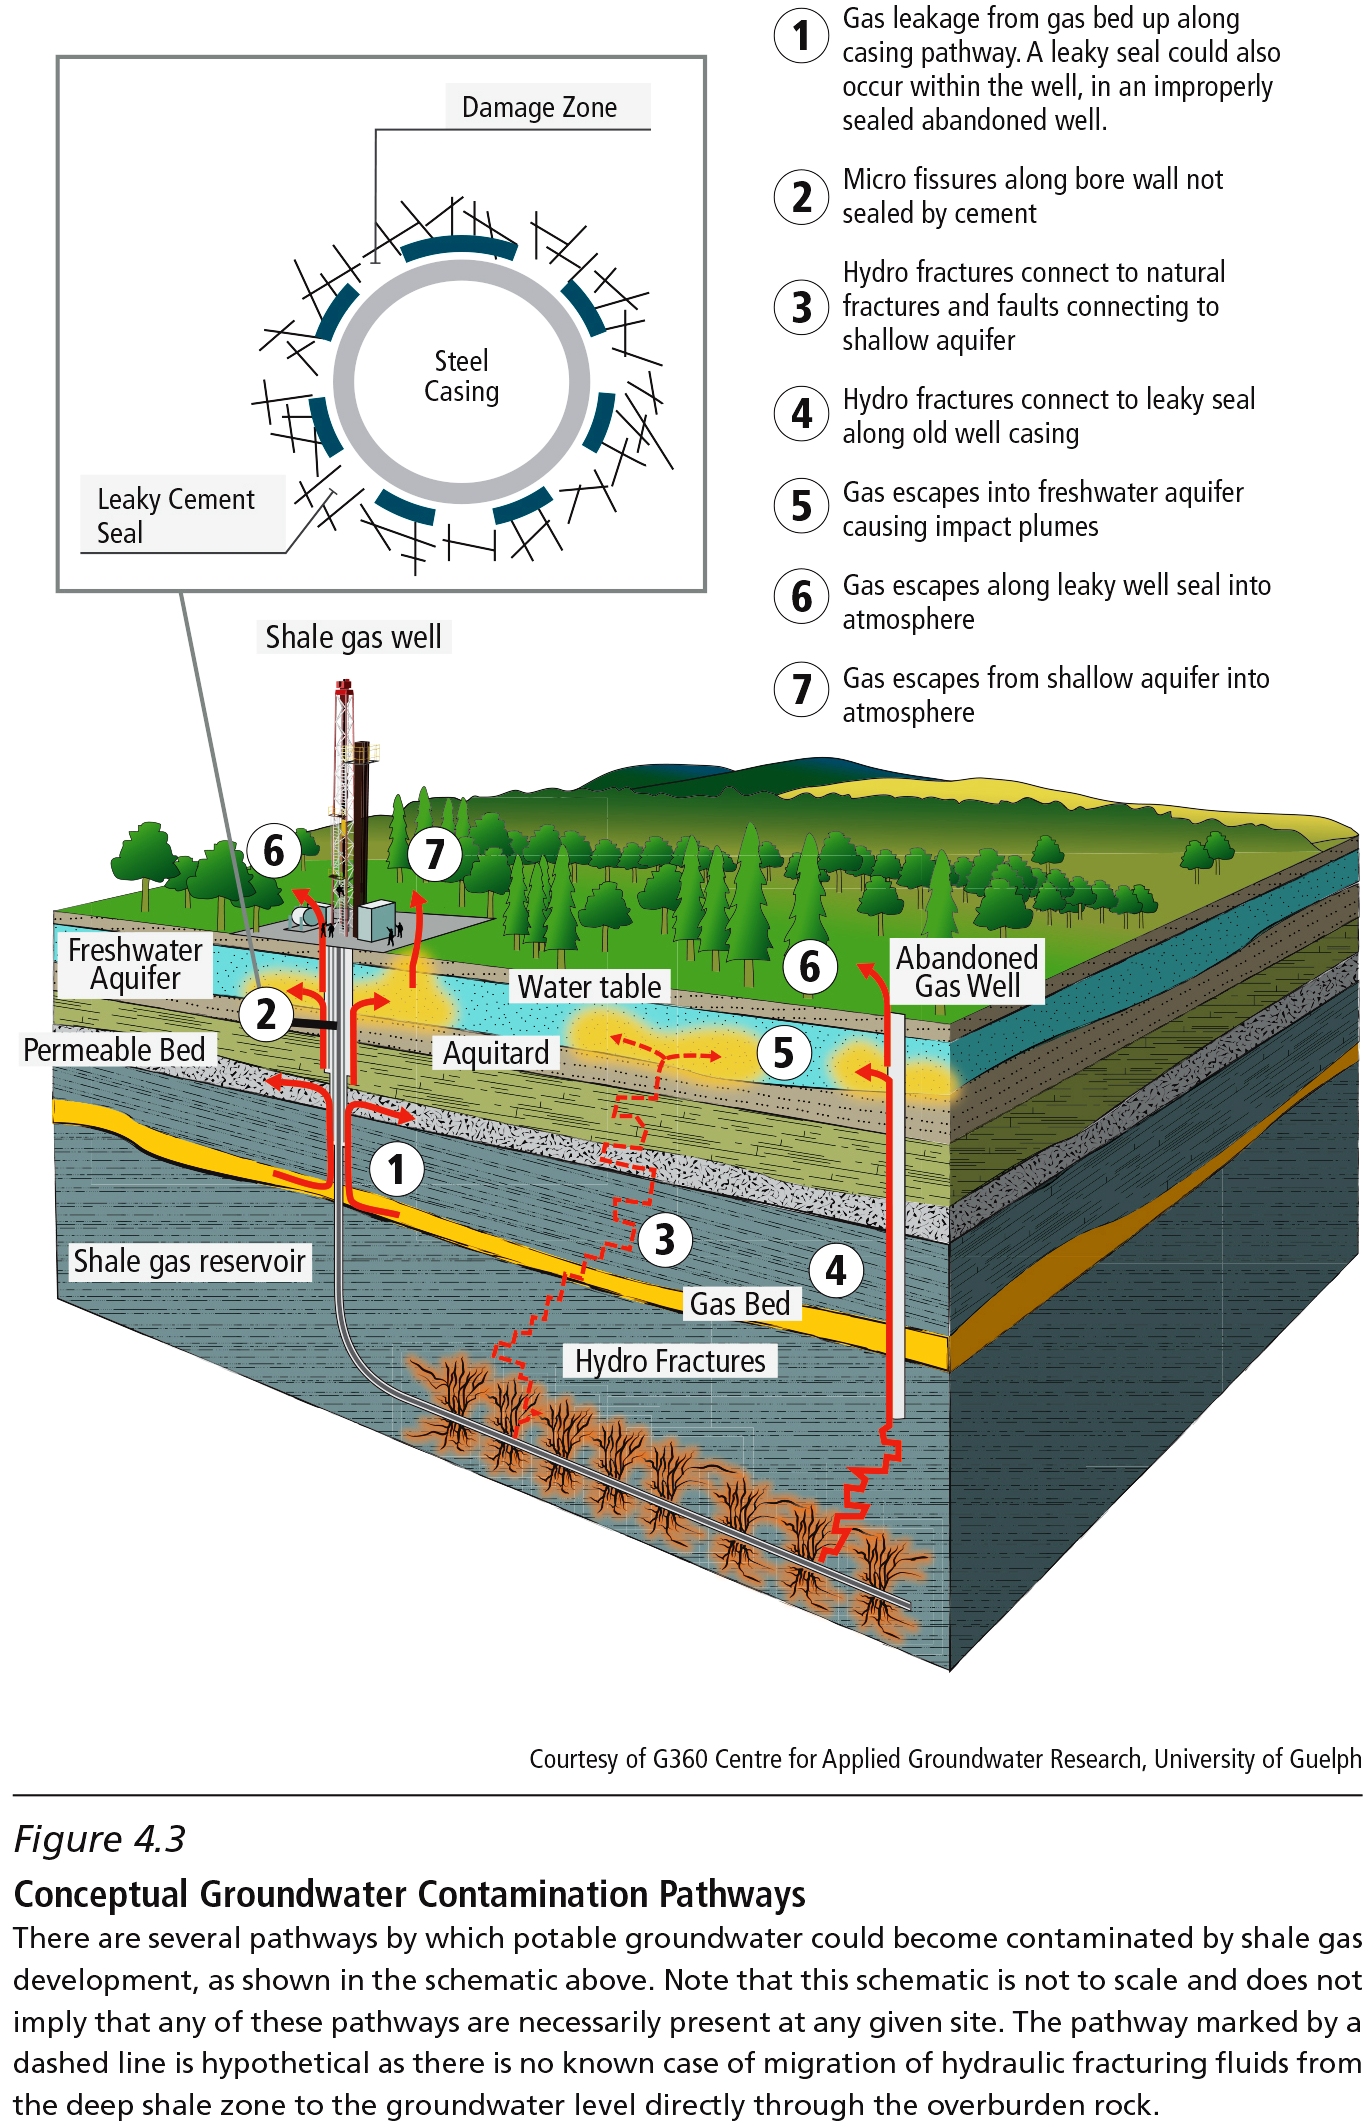 2014 04 30 CCA Conceptual Groundwater Contamination Pathway figure4_3_web_large